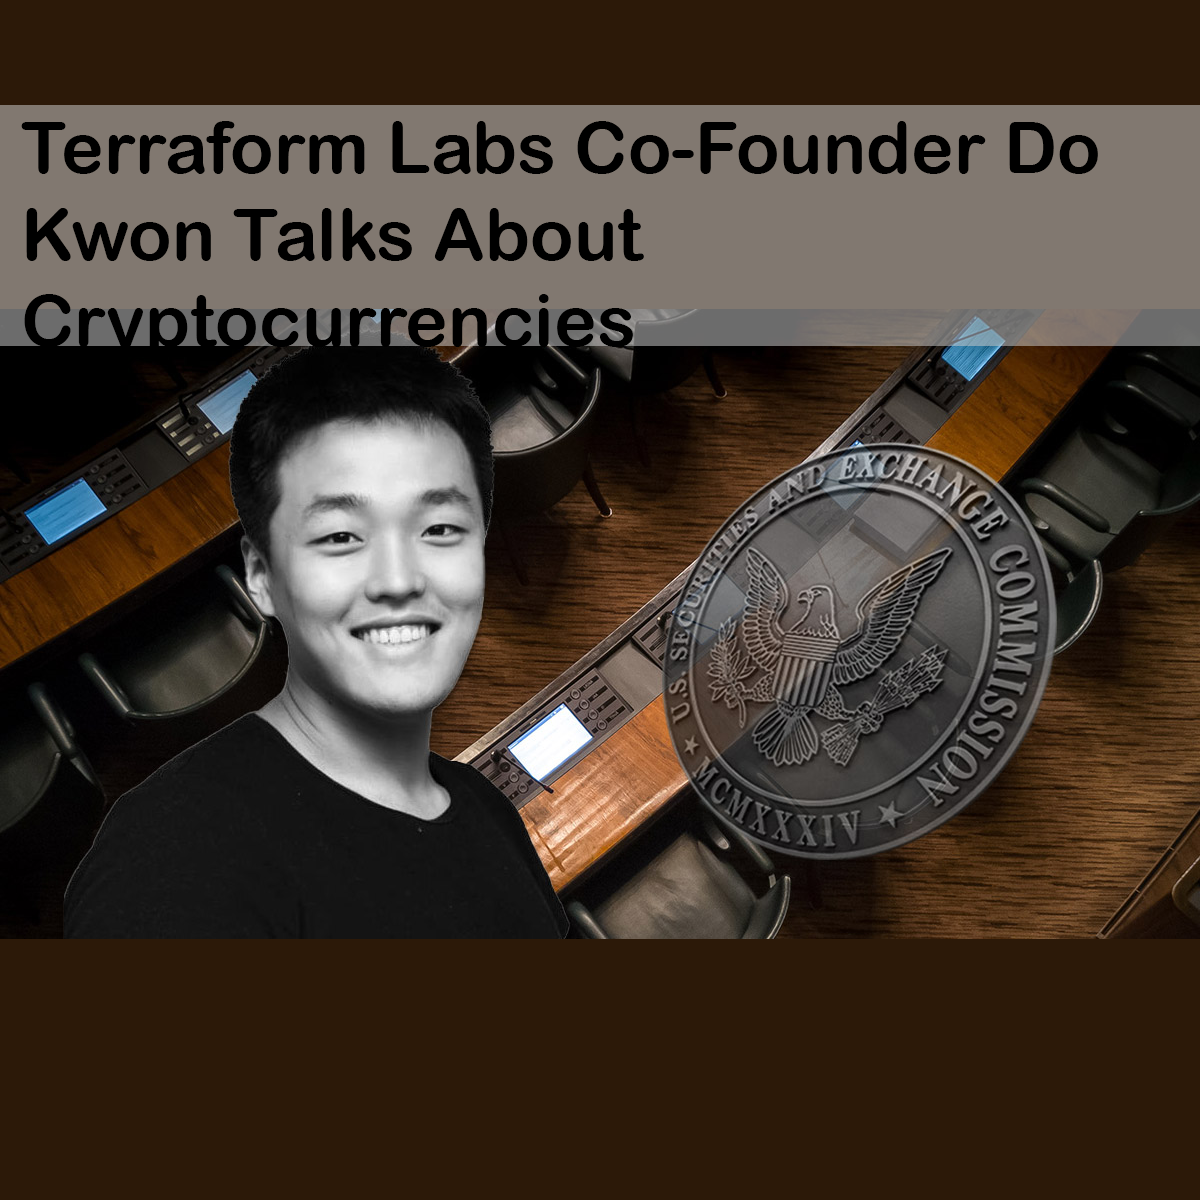 Terraform Labs Co-Founder Do Kwon Talks About Cryptocurrencies